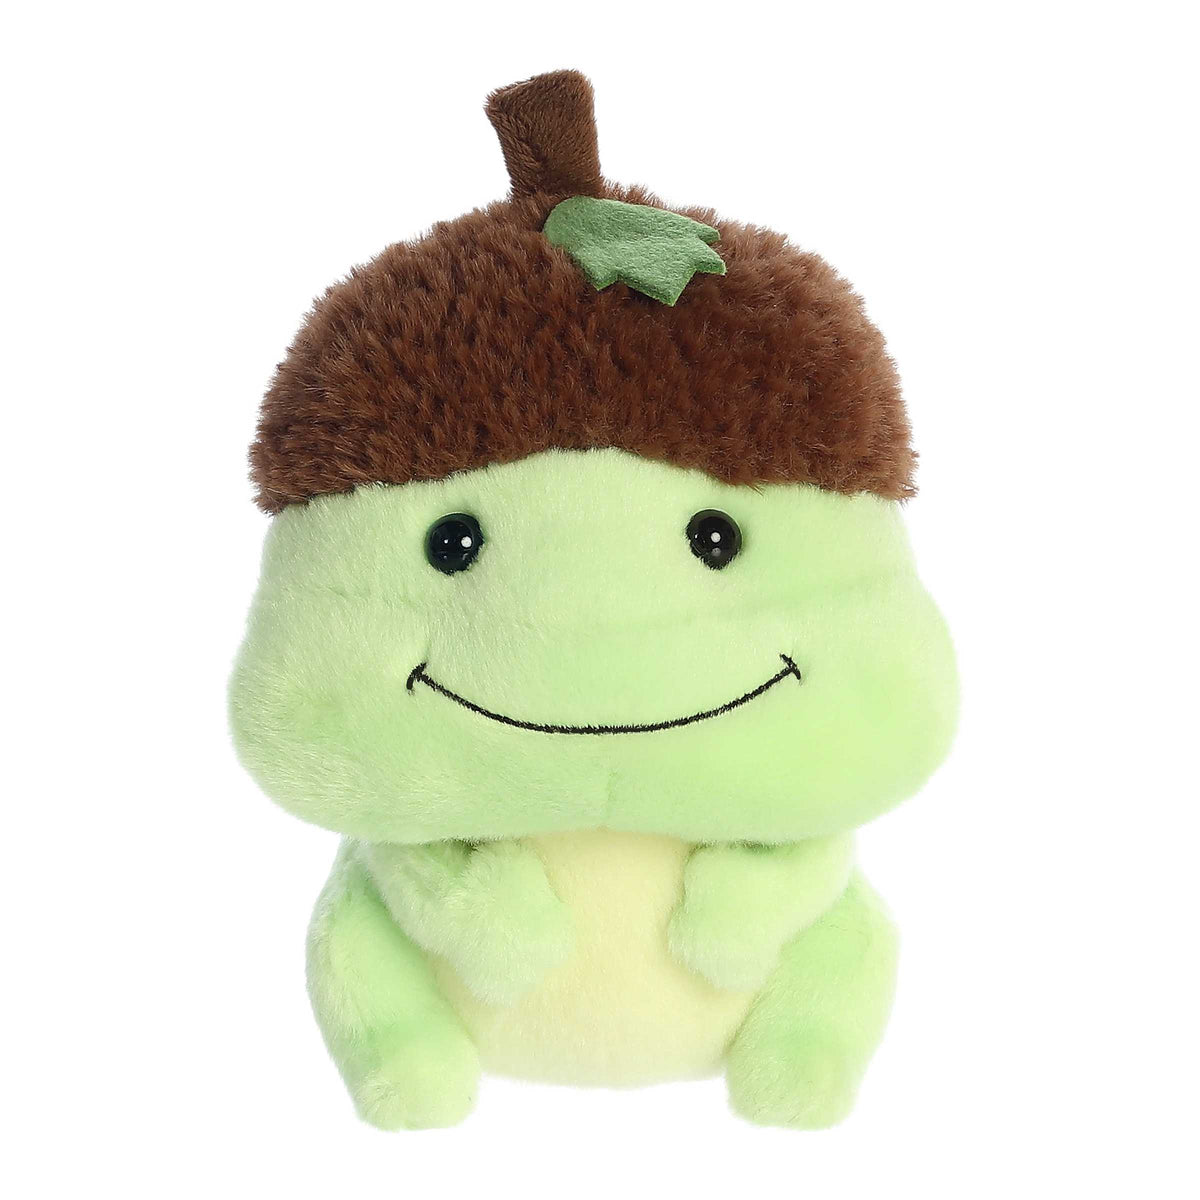 Life in a Nutshell Frog from Aurora's Spring Collection, with vibrant green color, big friendly smile, and unique acorn hat